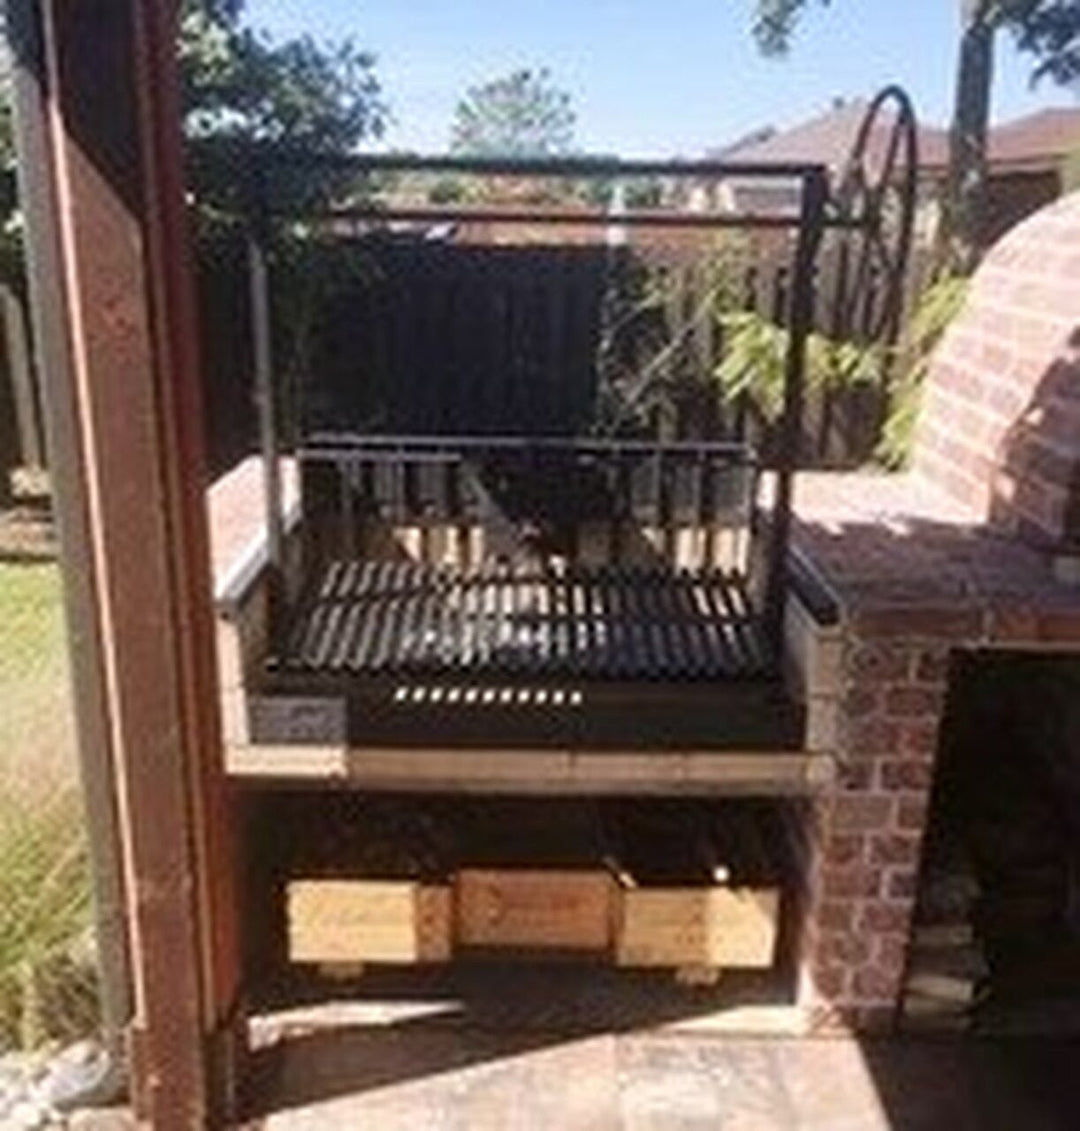 Argentine Architectural Grill with Rear Brasero & Flange - My Store